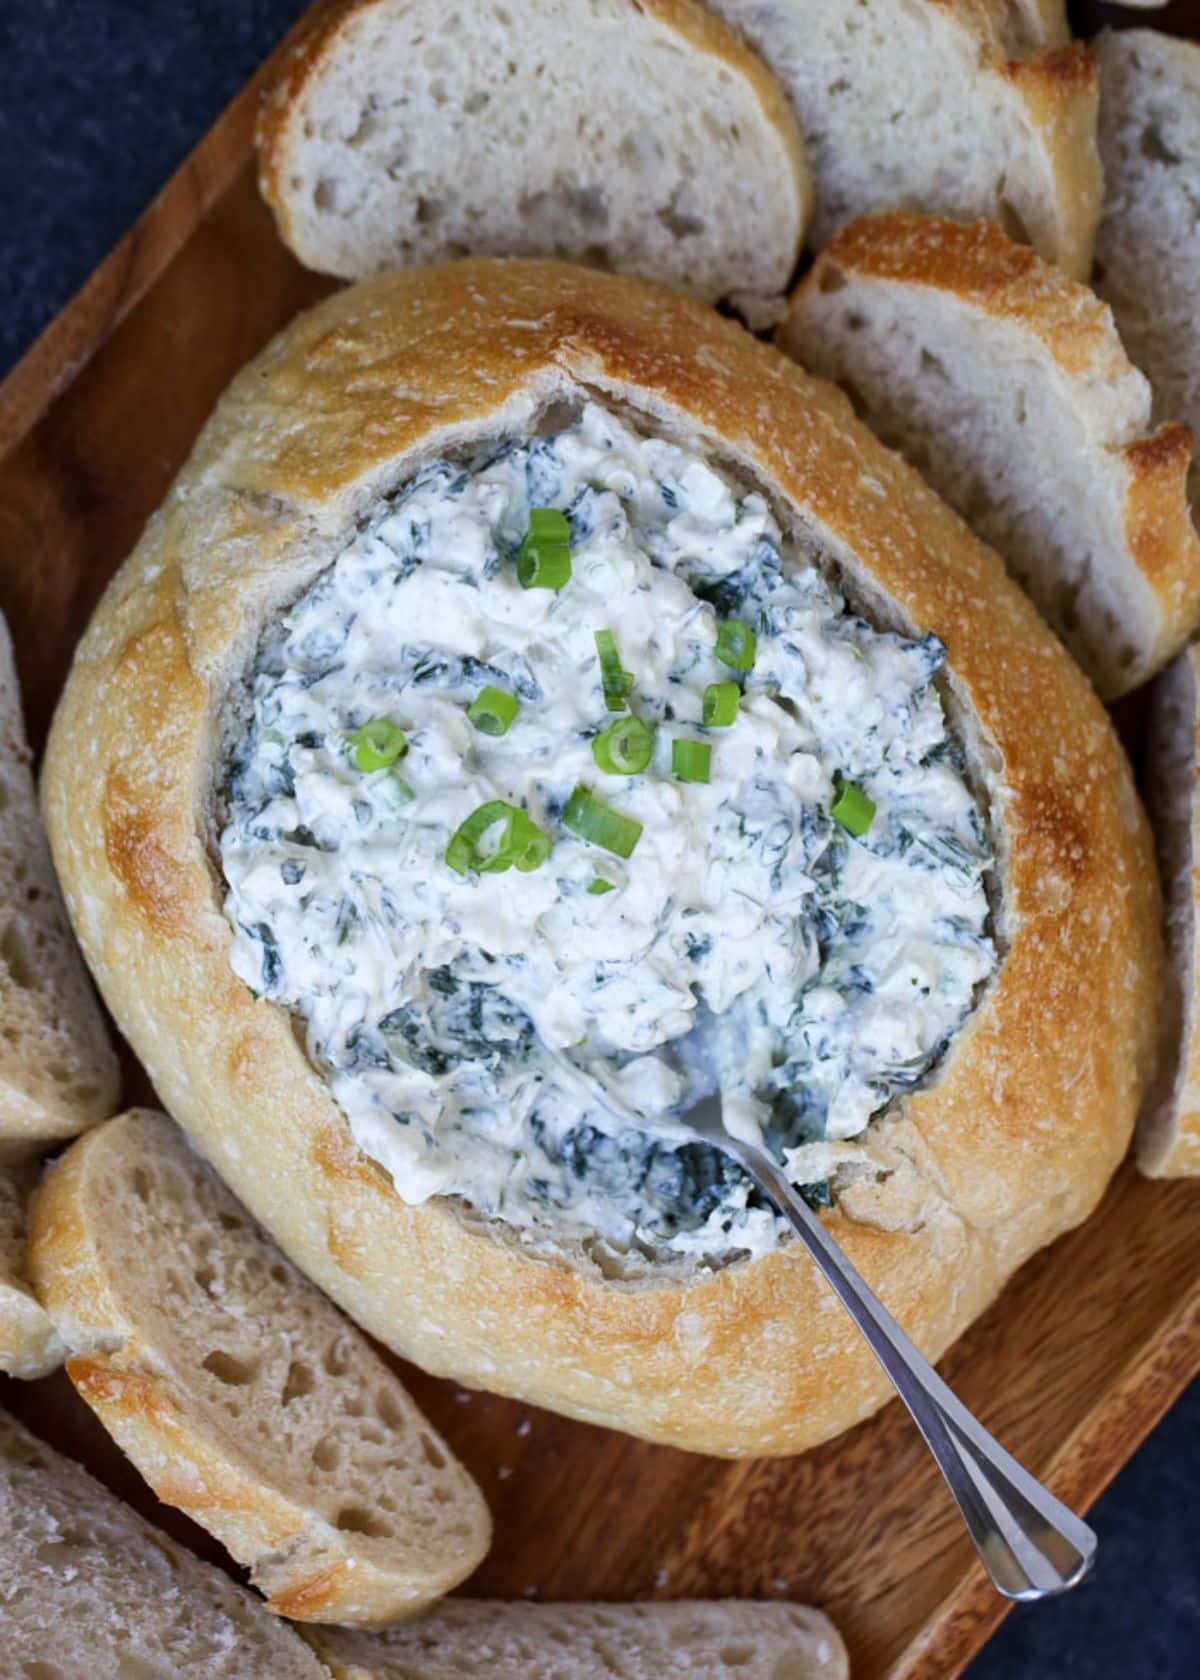 Creamy spinach dip with water chestnuts in a bread.